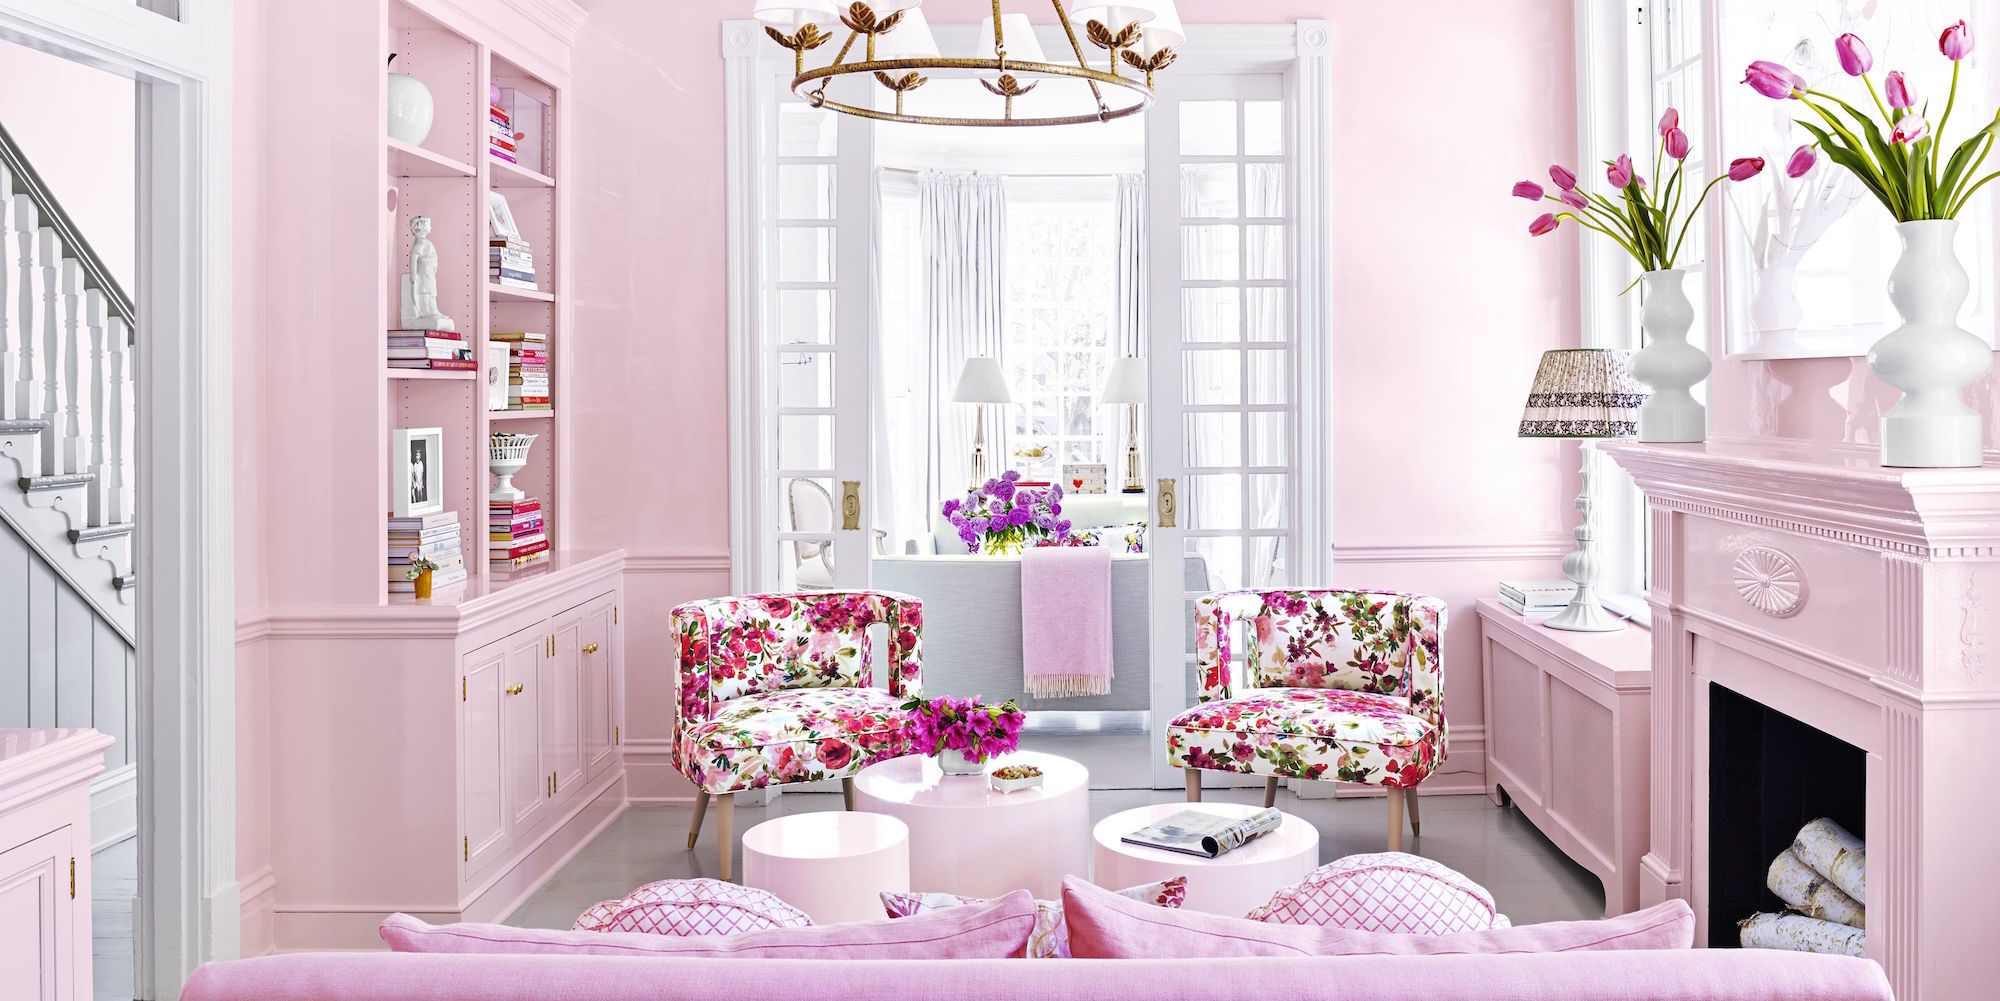 Decorating A Pink Room: How To Decorate With Pink